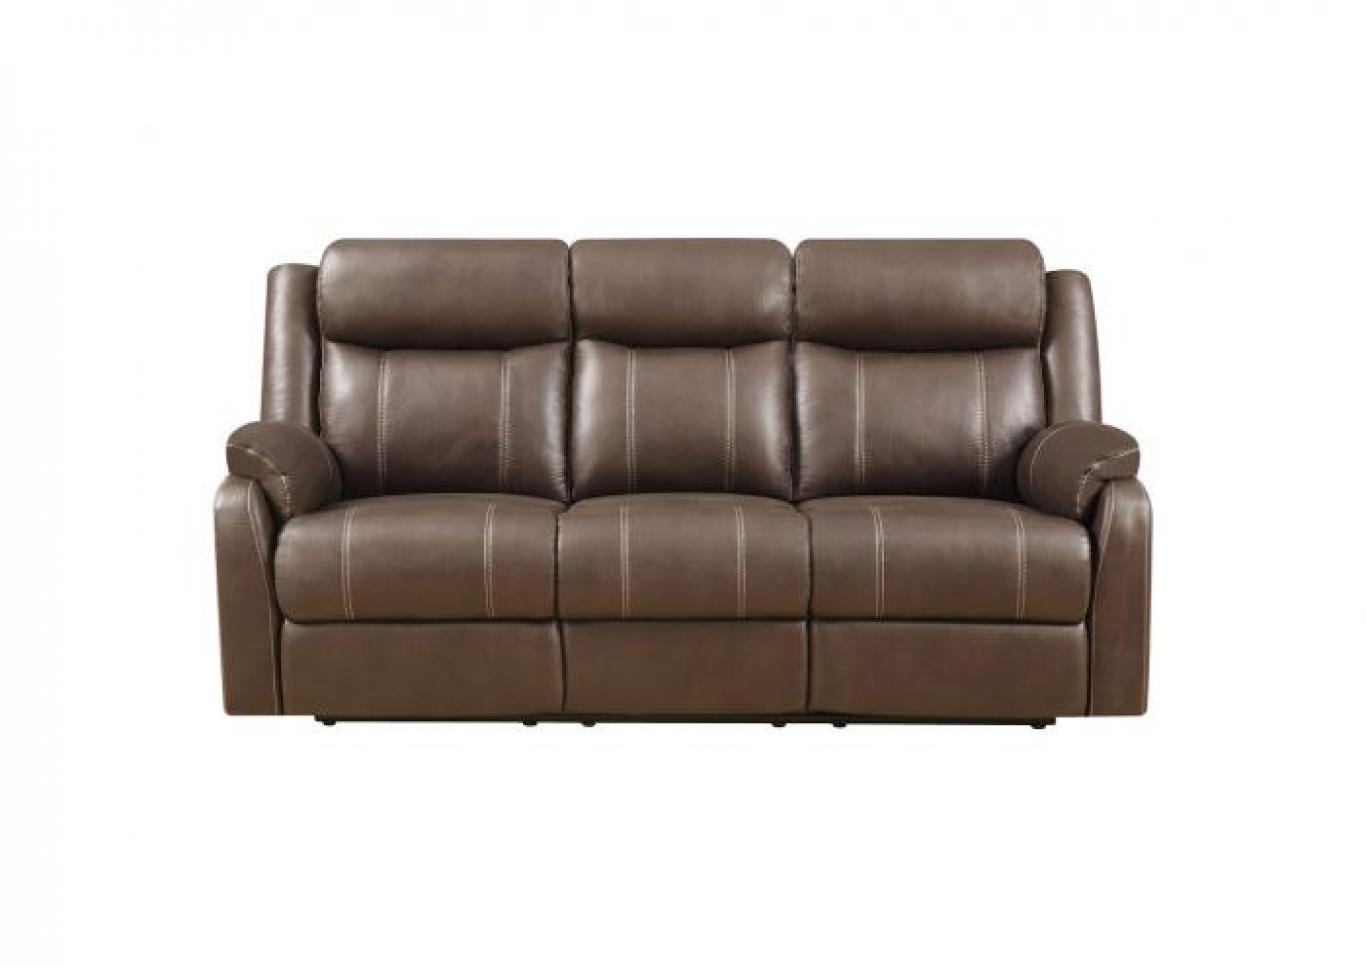 Domino Reclining Sofa w/Drop Down Table - Brown,Instore